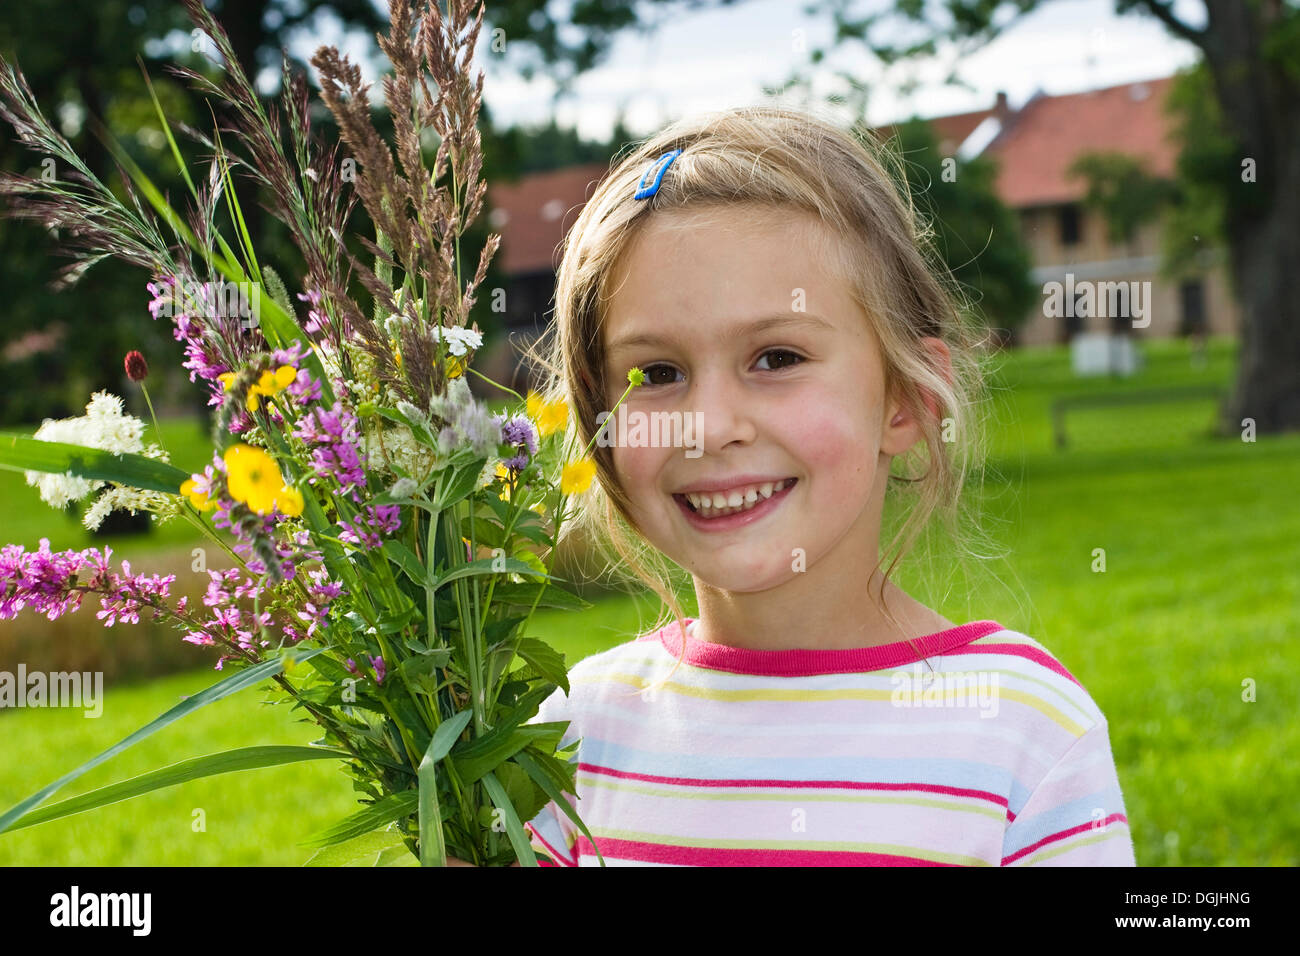 Blond girl, 6, holding a bunch of wild flowers in front of a farmhouse, Bavaria Stock Photo